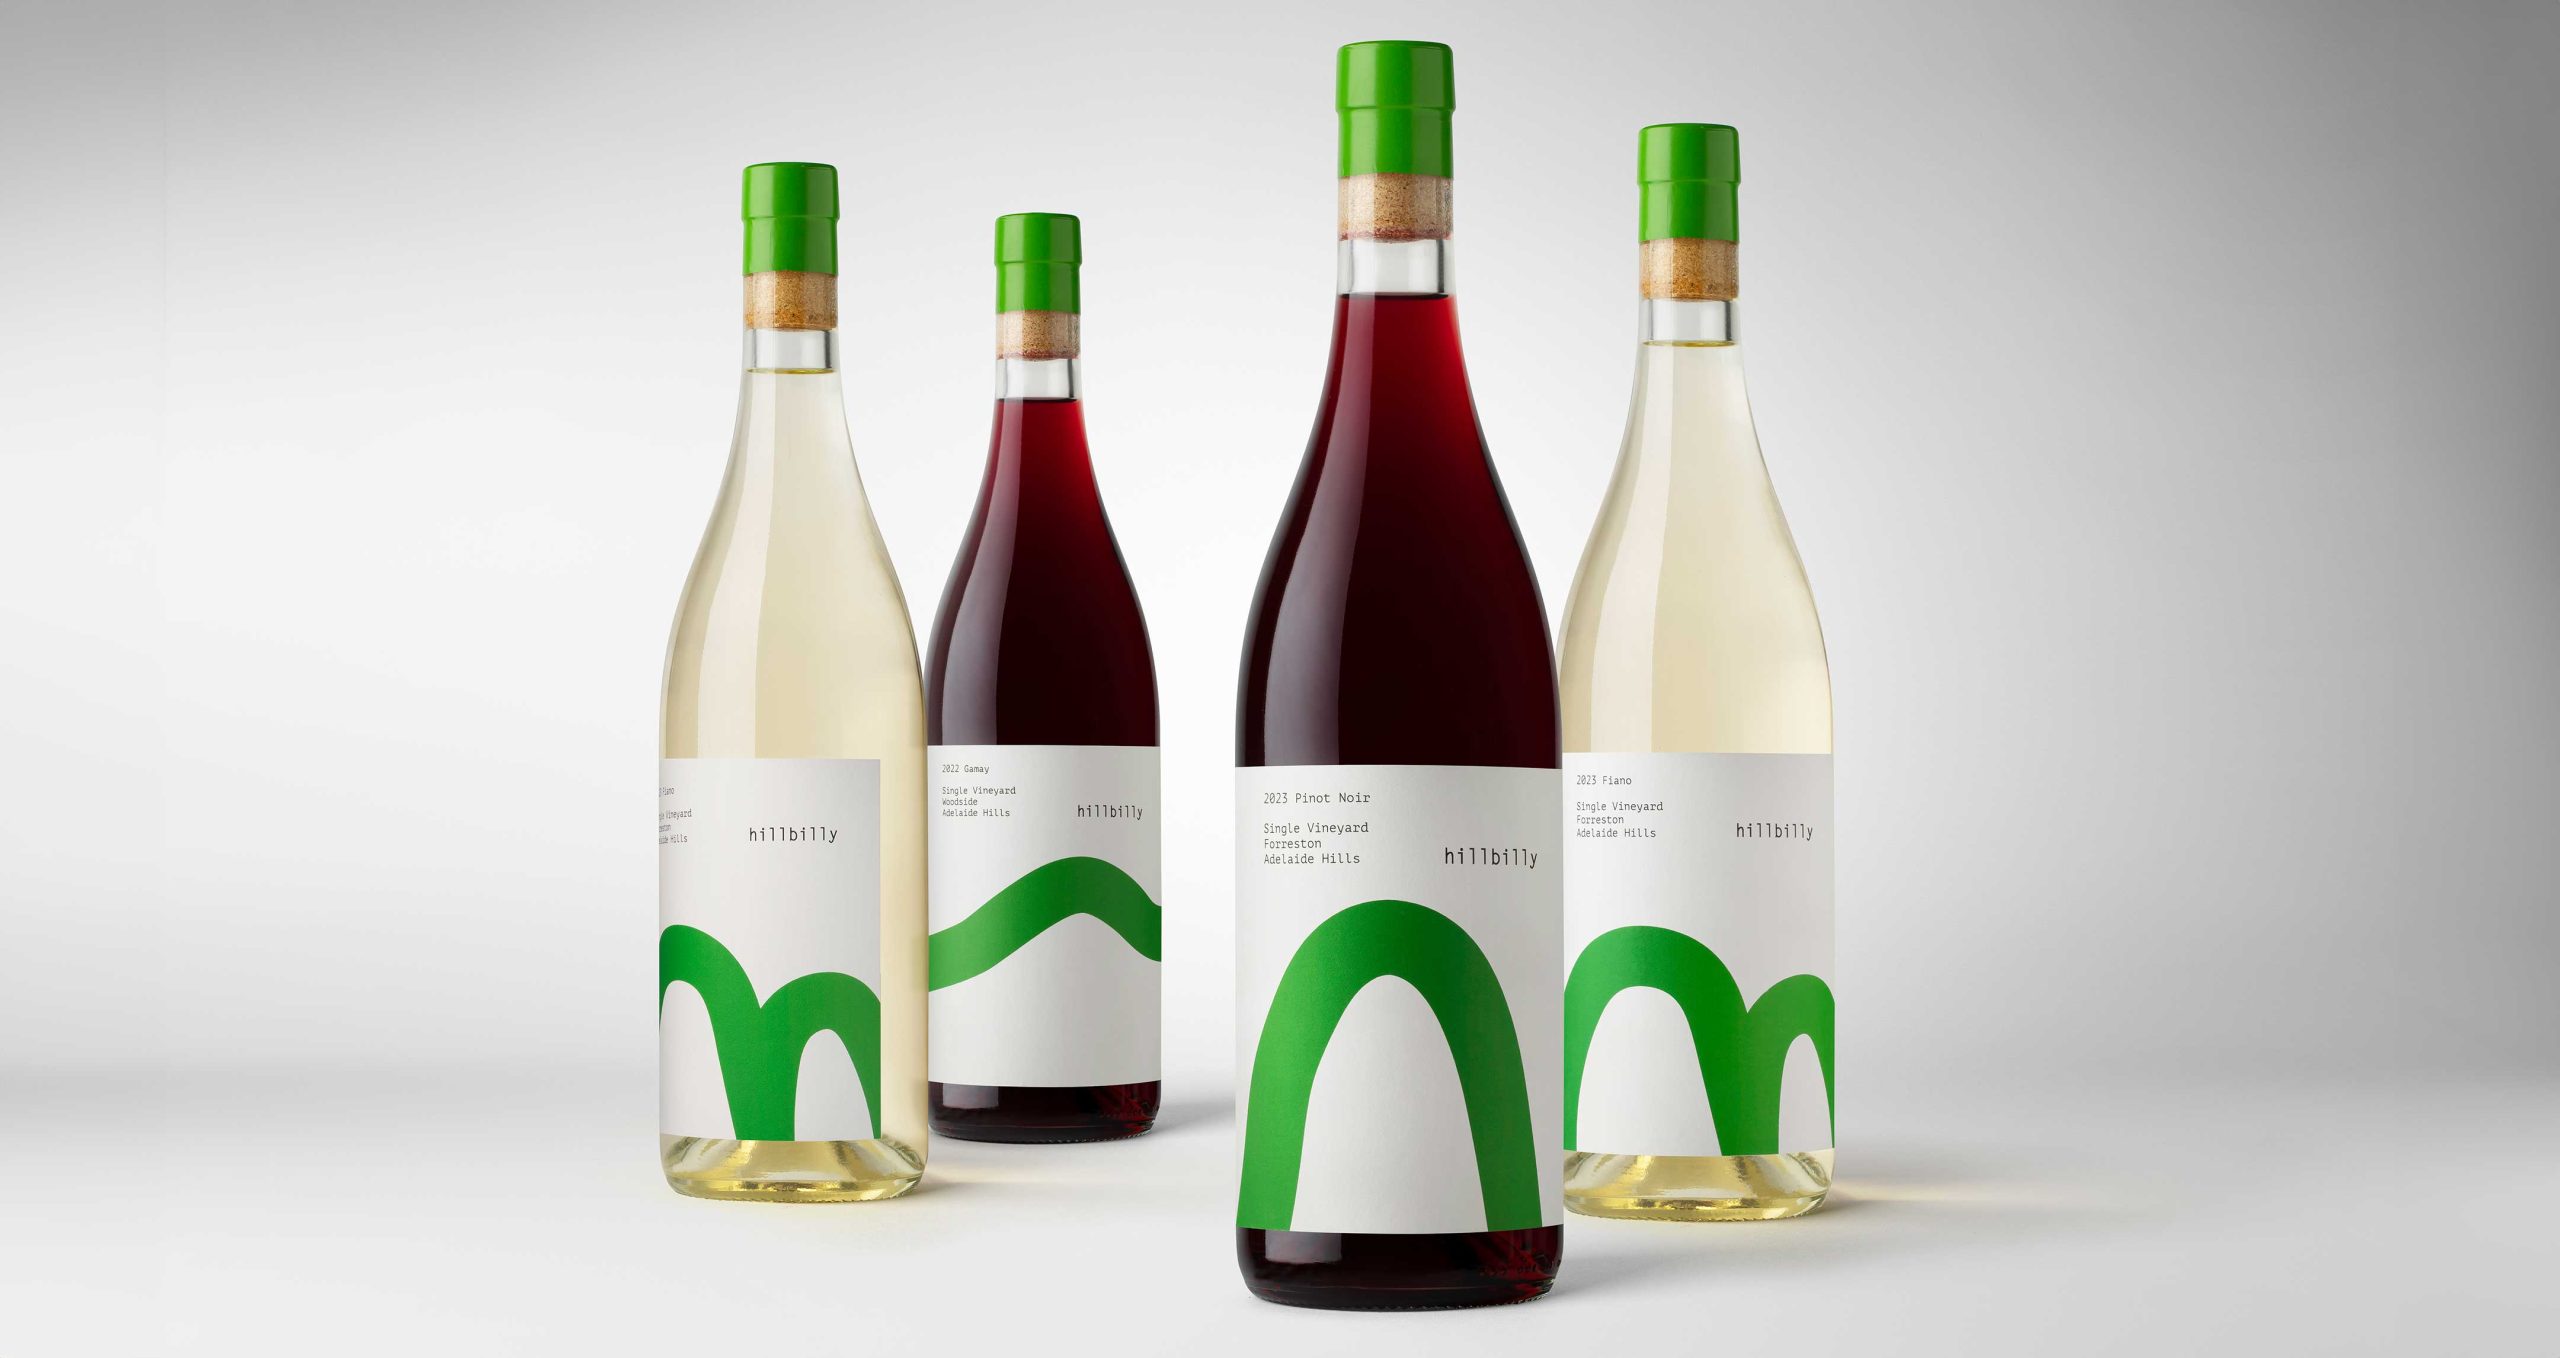 Hillbilly’s Wine Subverts Our Expectations with Artsy, Understated Bottle Design